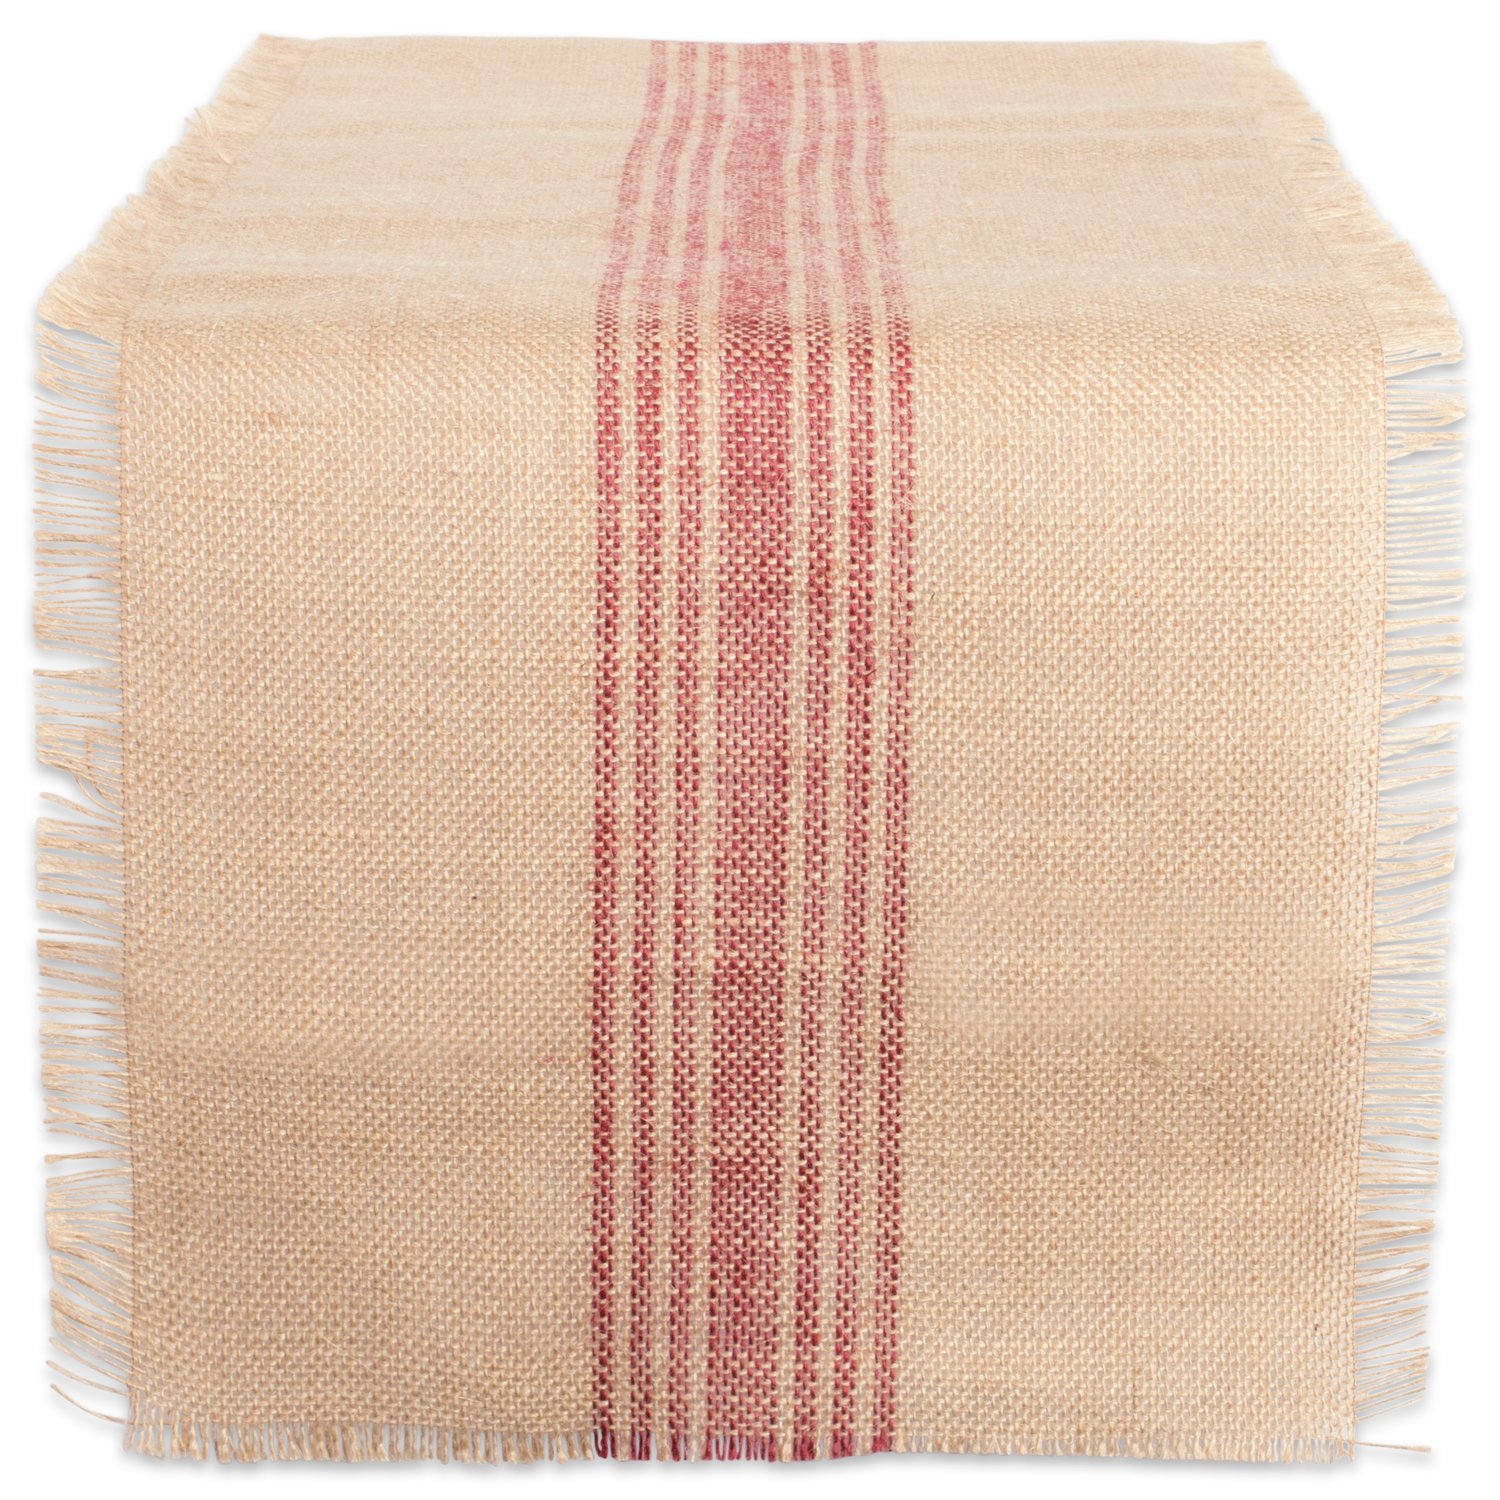 DII Jute Burlap Collection Kitchen Tabletop, Table Runner, 14x72, Middle Stripe Barn Red